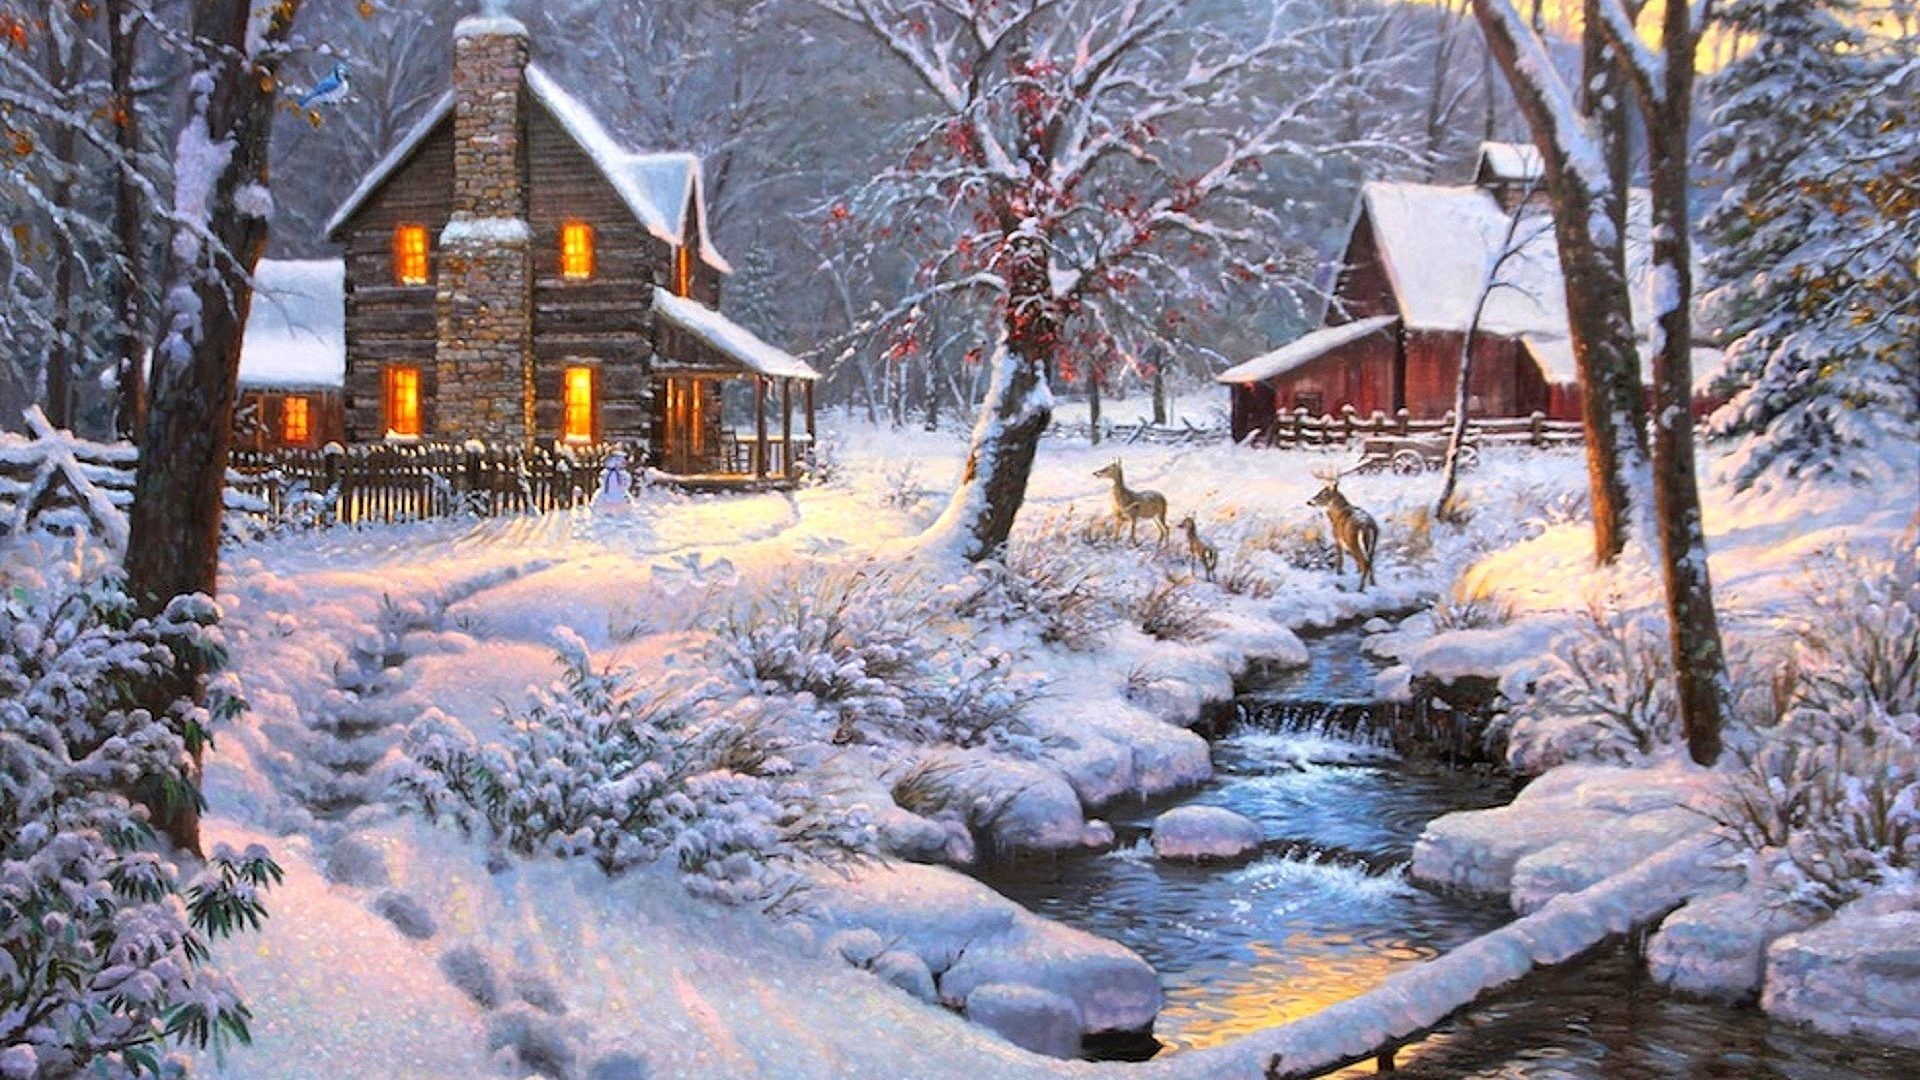 1920x1080 Cozy Tag - New Holidays Bird Love Deer Four Paintings Houses Drawings  Winter Attractions Trees Seasons